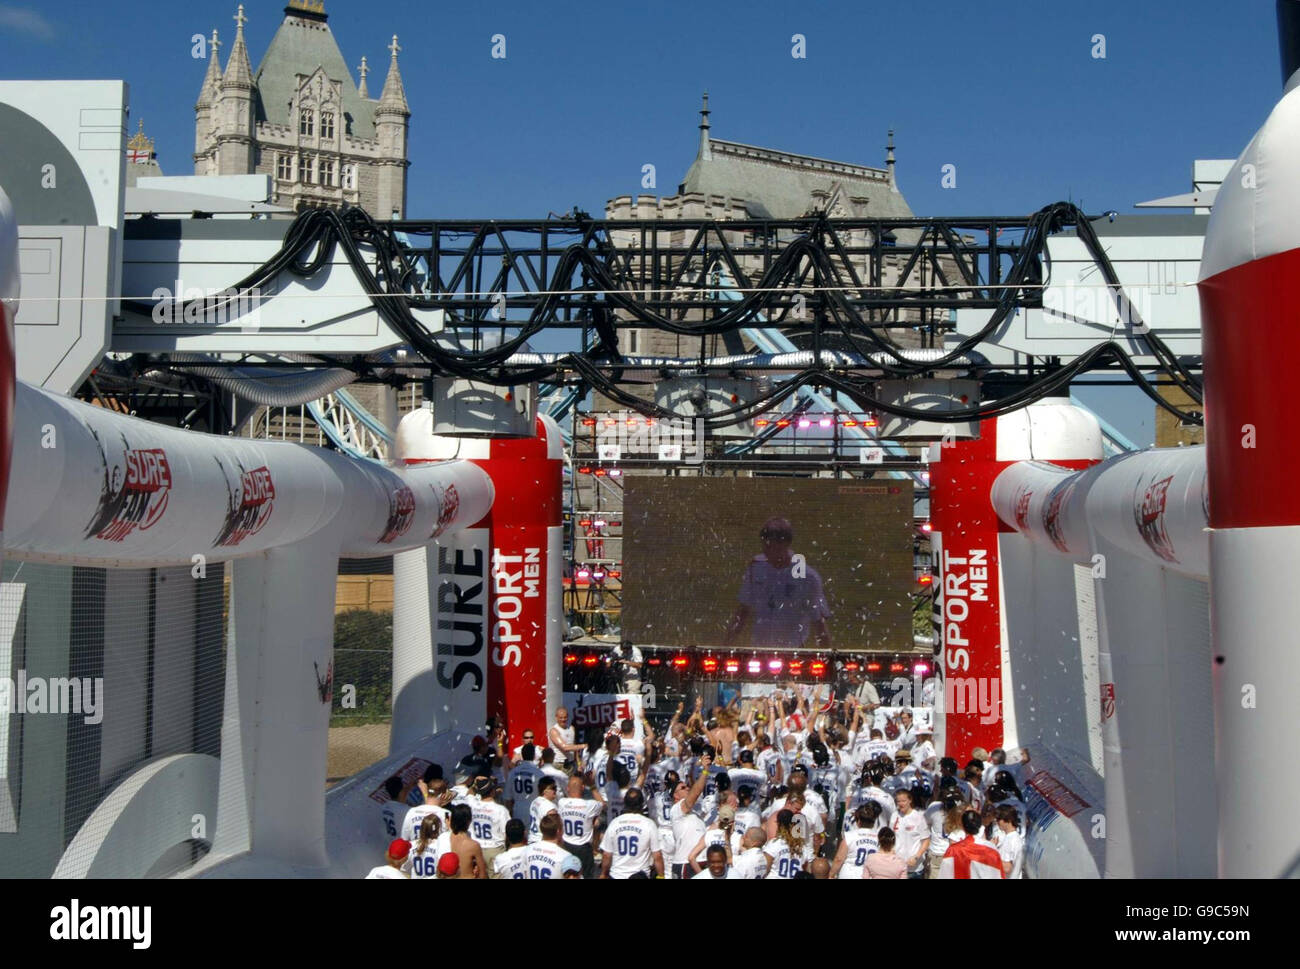 WORLDCUP Fans London. England football fans watch England vs Paraguay in the Sure FanZone at Tower Bridge, London. Stock Photo